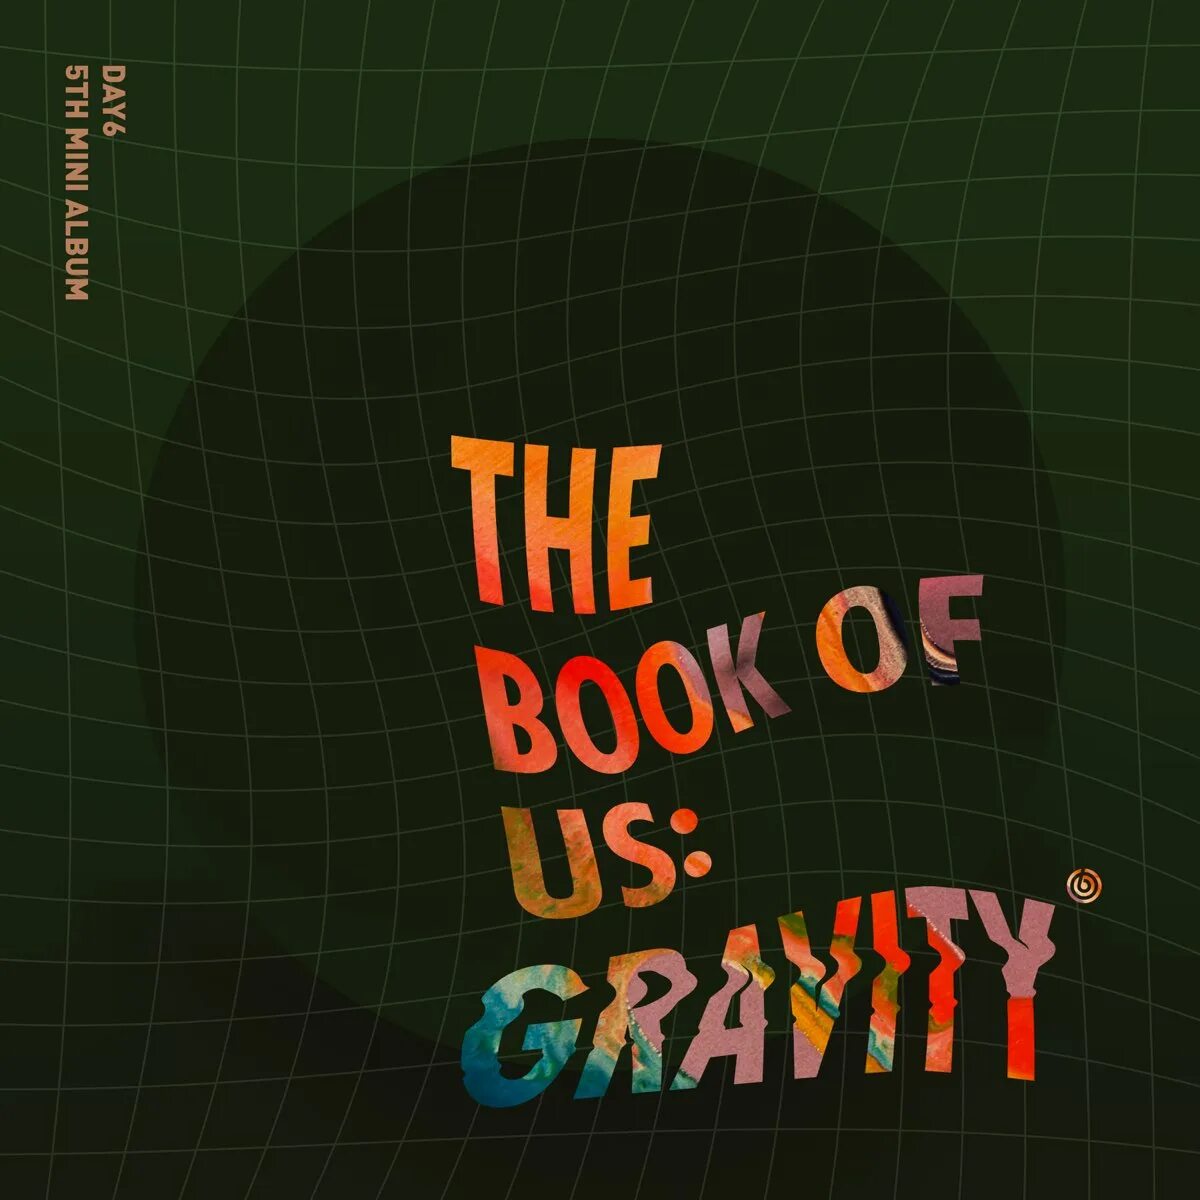 Day6 альбомы. The book of us : Gravity day6. Day6 the bookof us обложка альбома. The Gravity of us книга. Cover day6